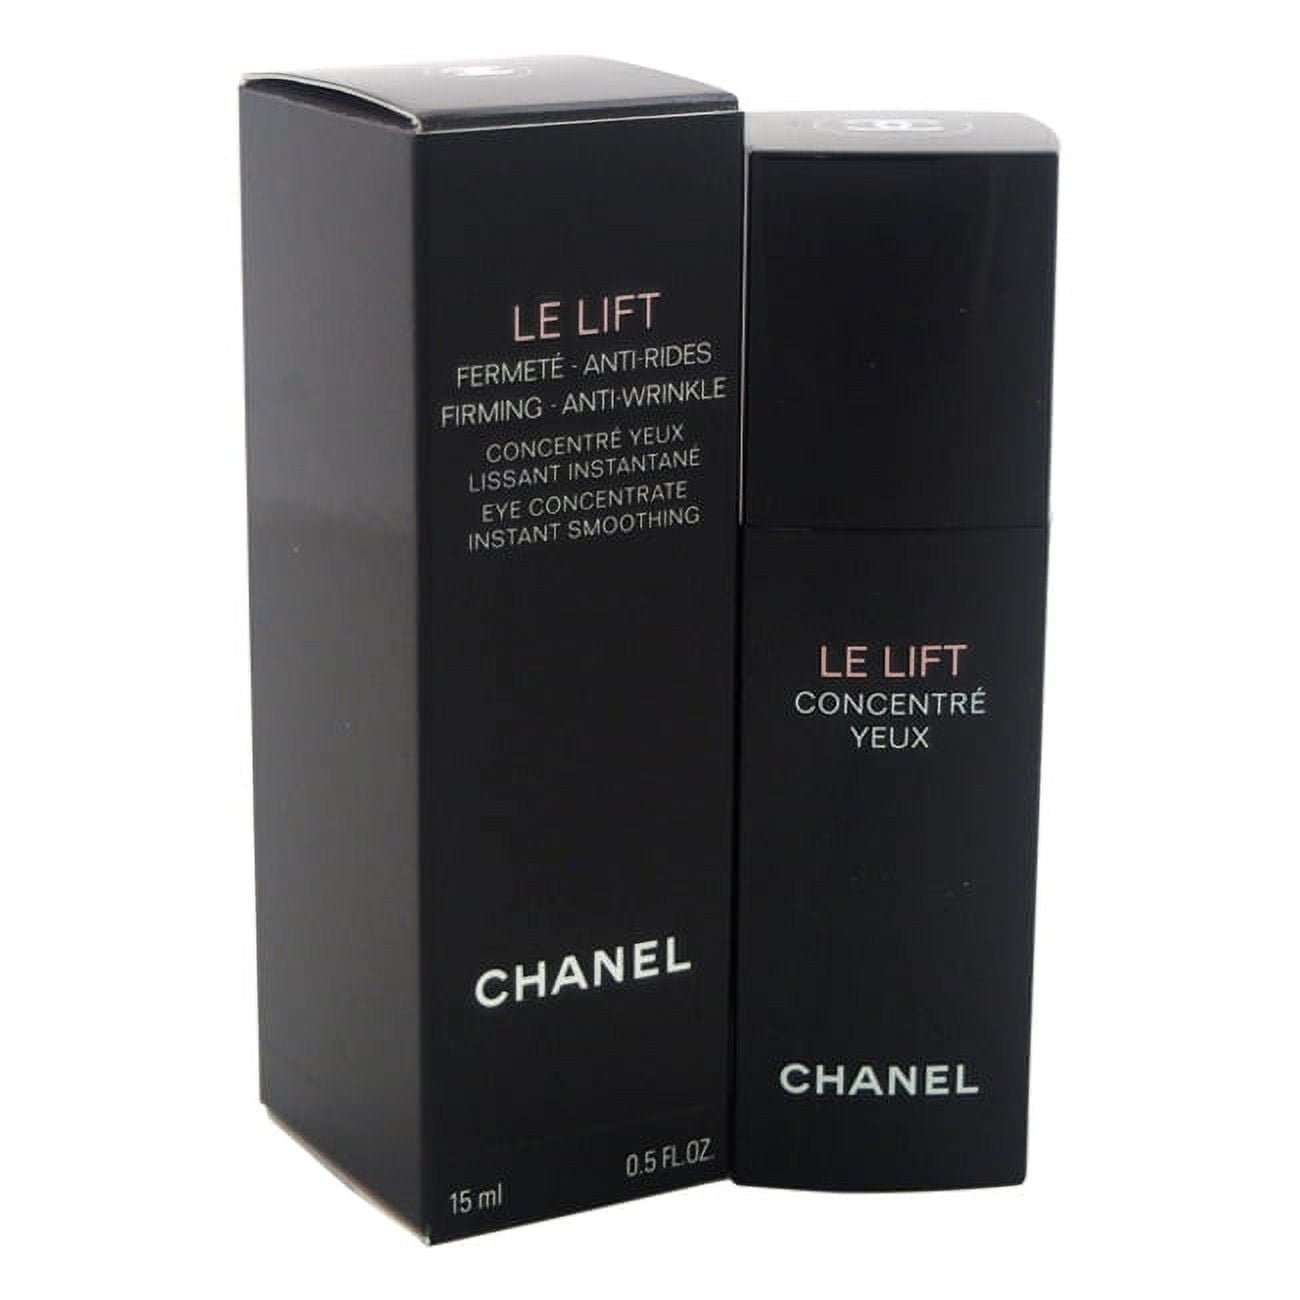 oz Women Concentrate 0.5 Chanel Smoothing Lift by - Firming Le Instant Anti-Wrinkle for Cream - Eye